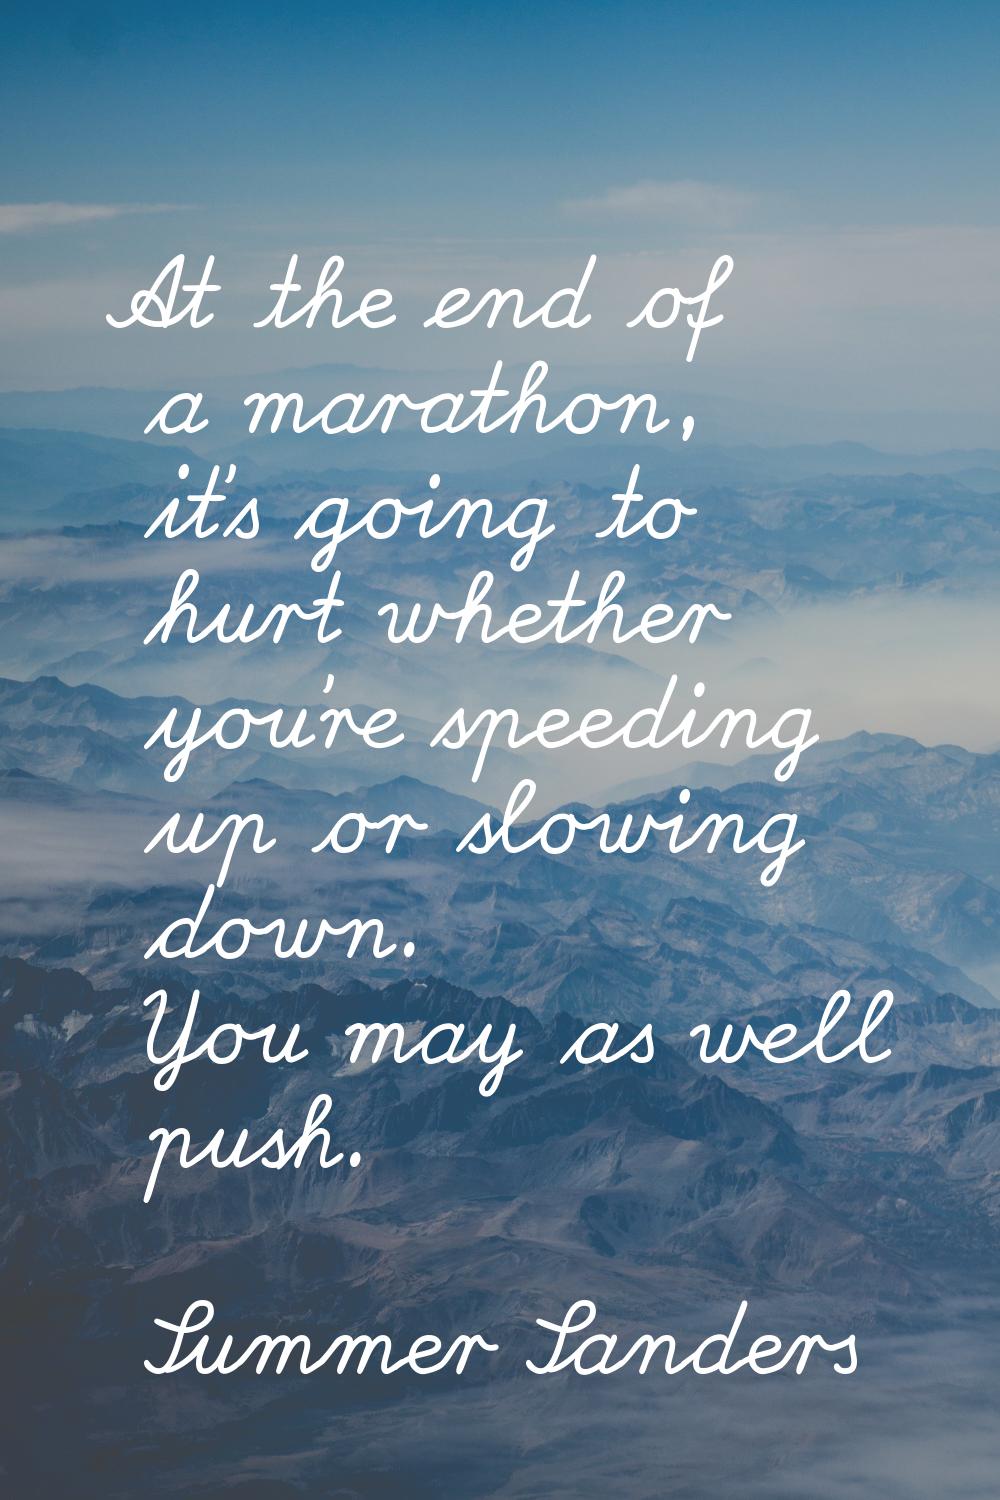 At the end of a marathon, it's going to hurt whether you're speeding up or slowing down. You may as